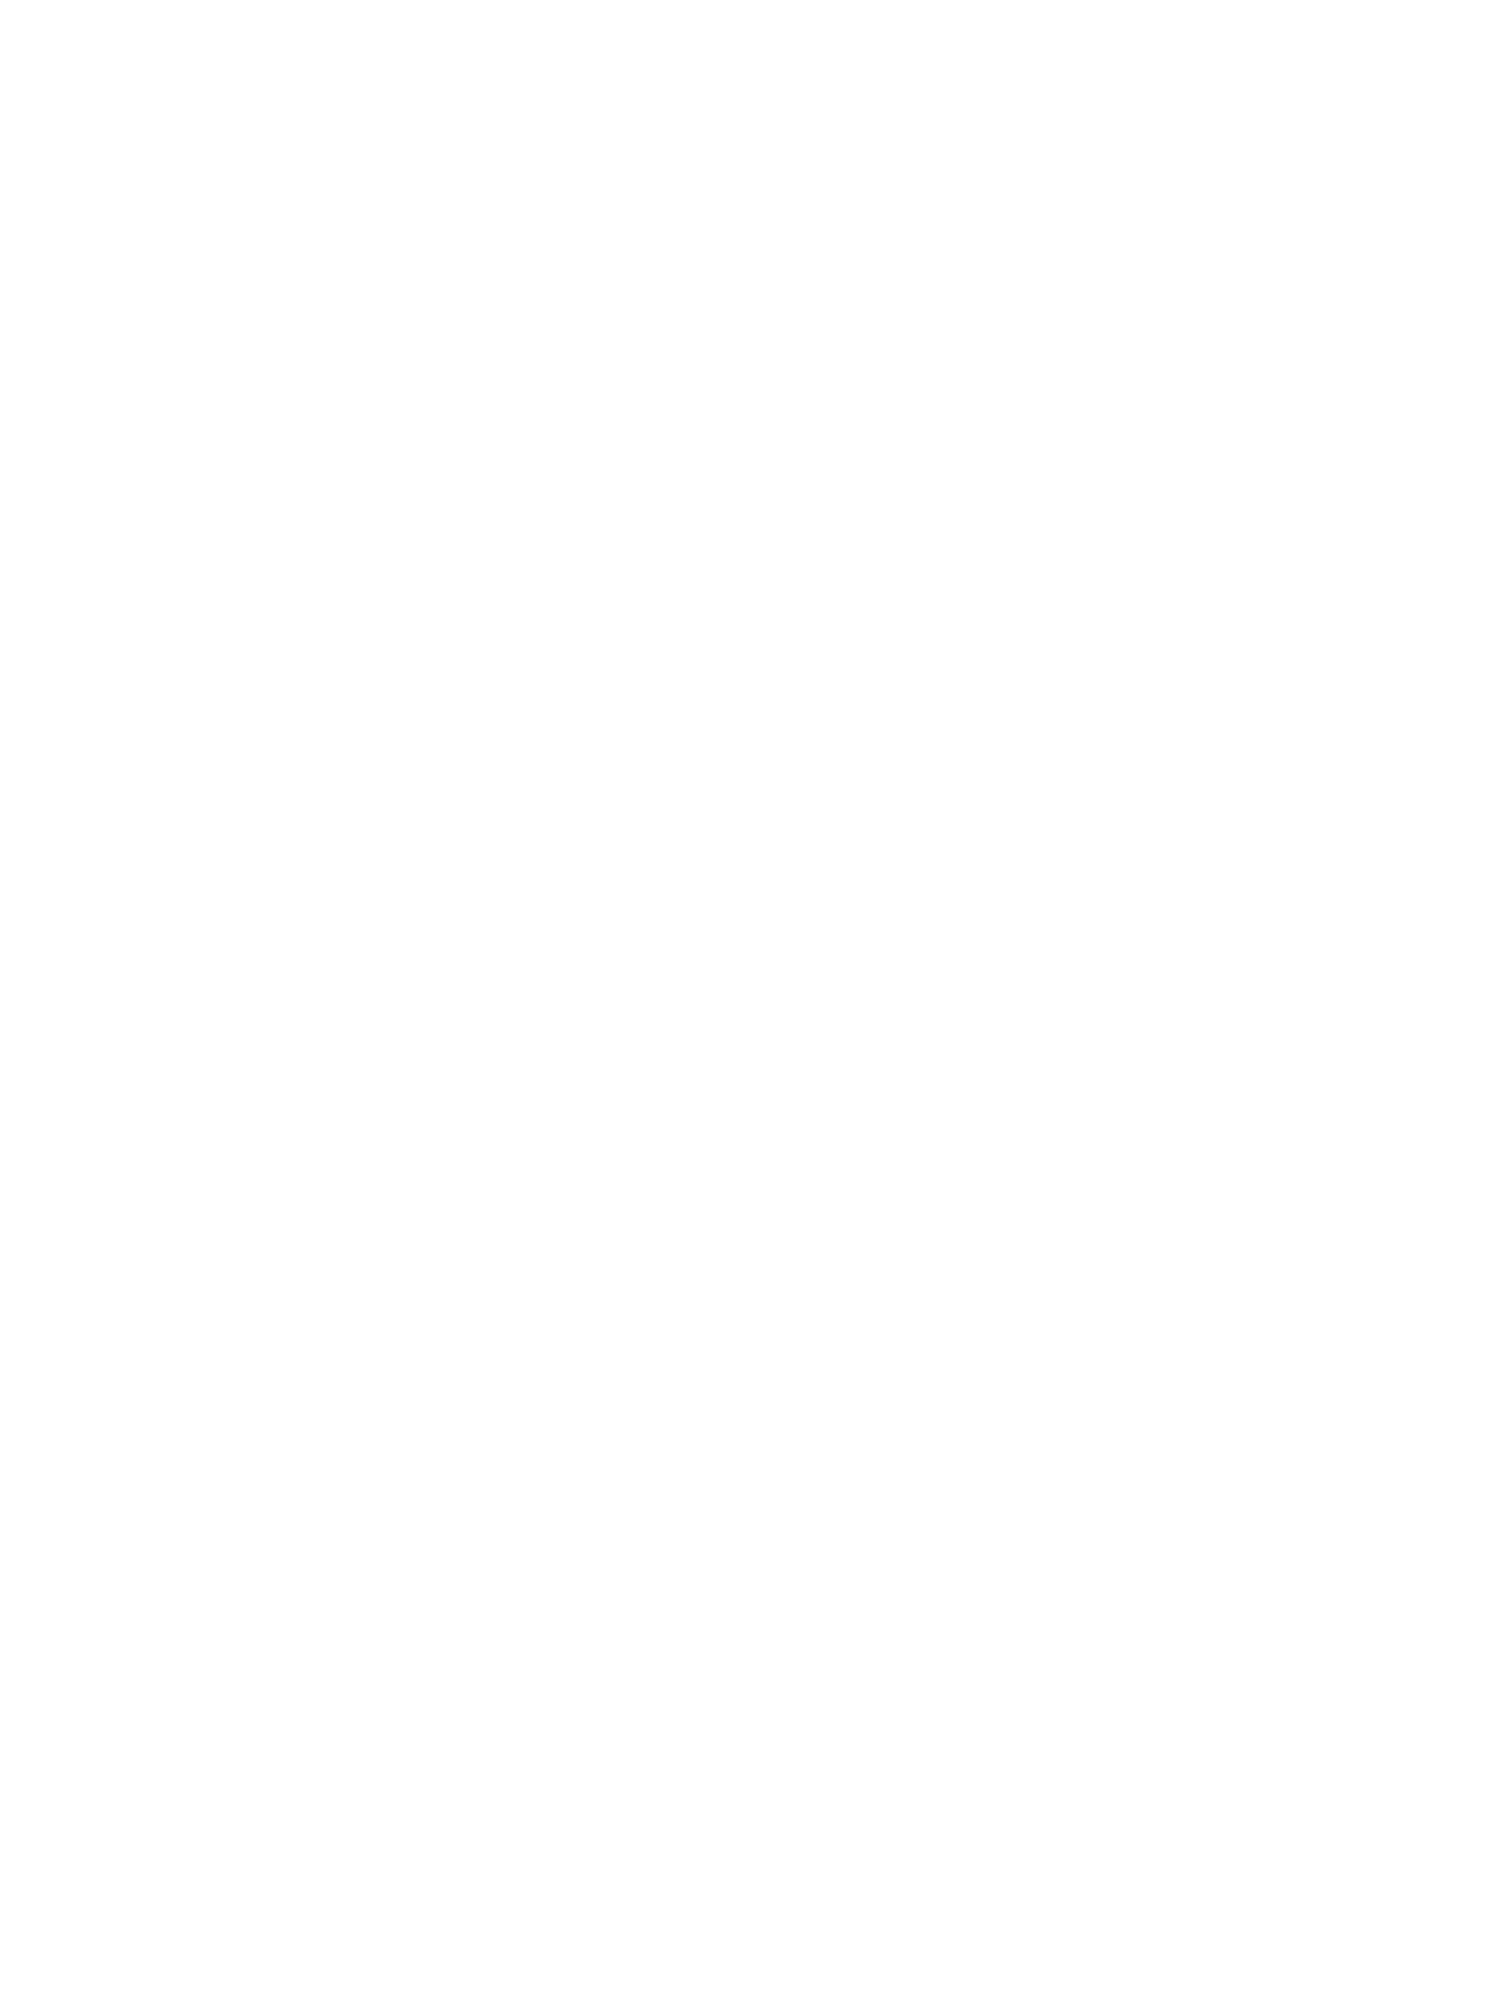 A line drawing of the front and rear panels of the CMC2 showing controls and connectors